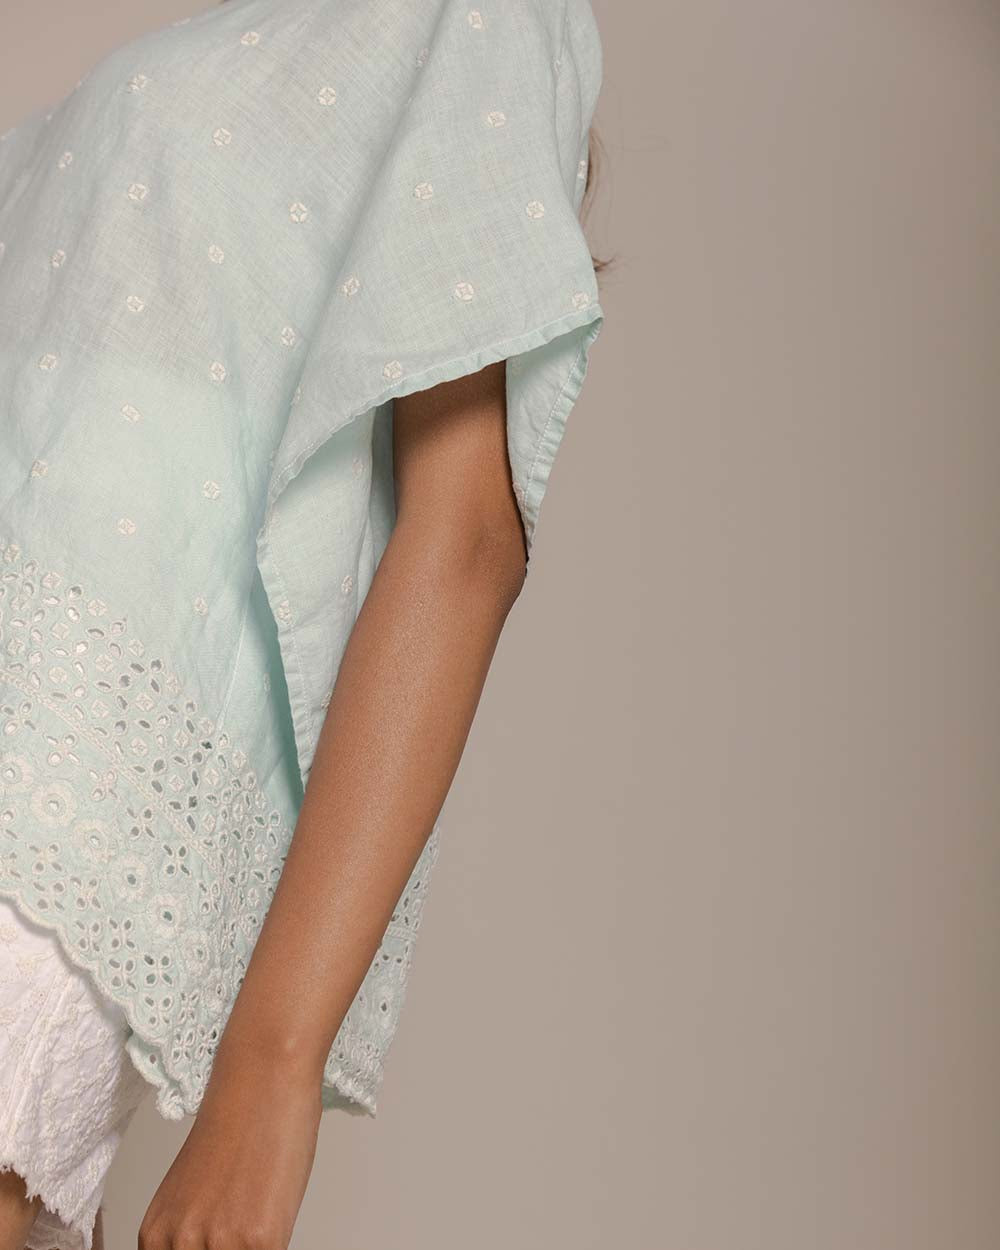 Popsicles & Carousels Kaftan Top - Sage Mint at Kamakhyaa by Reistor. This item is Blue, Casual Wear, Embroidered, Hemp, Kaftans, Natural, Tops, Womenswear